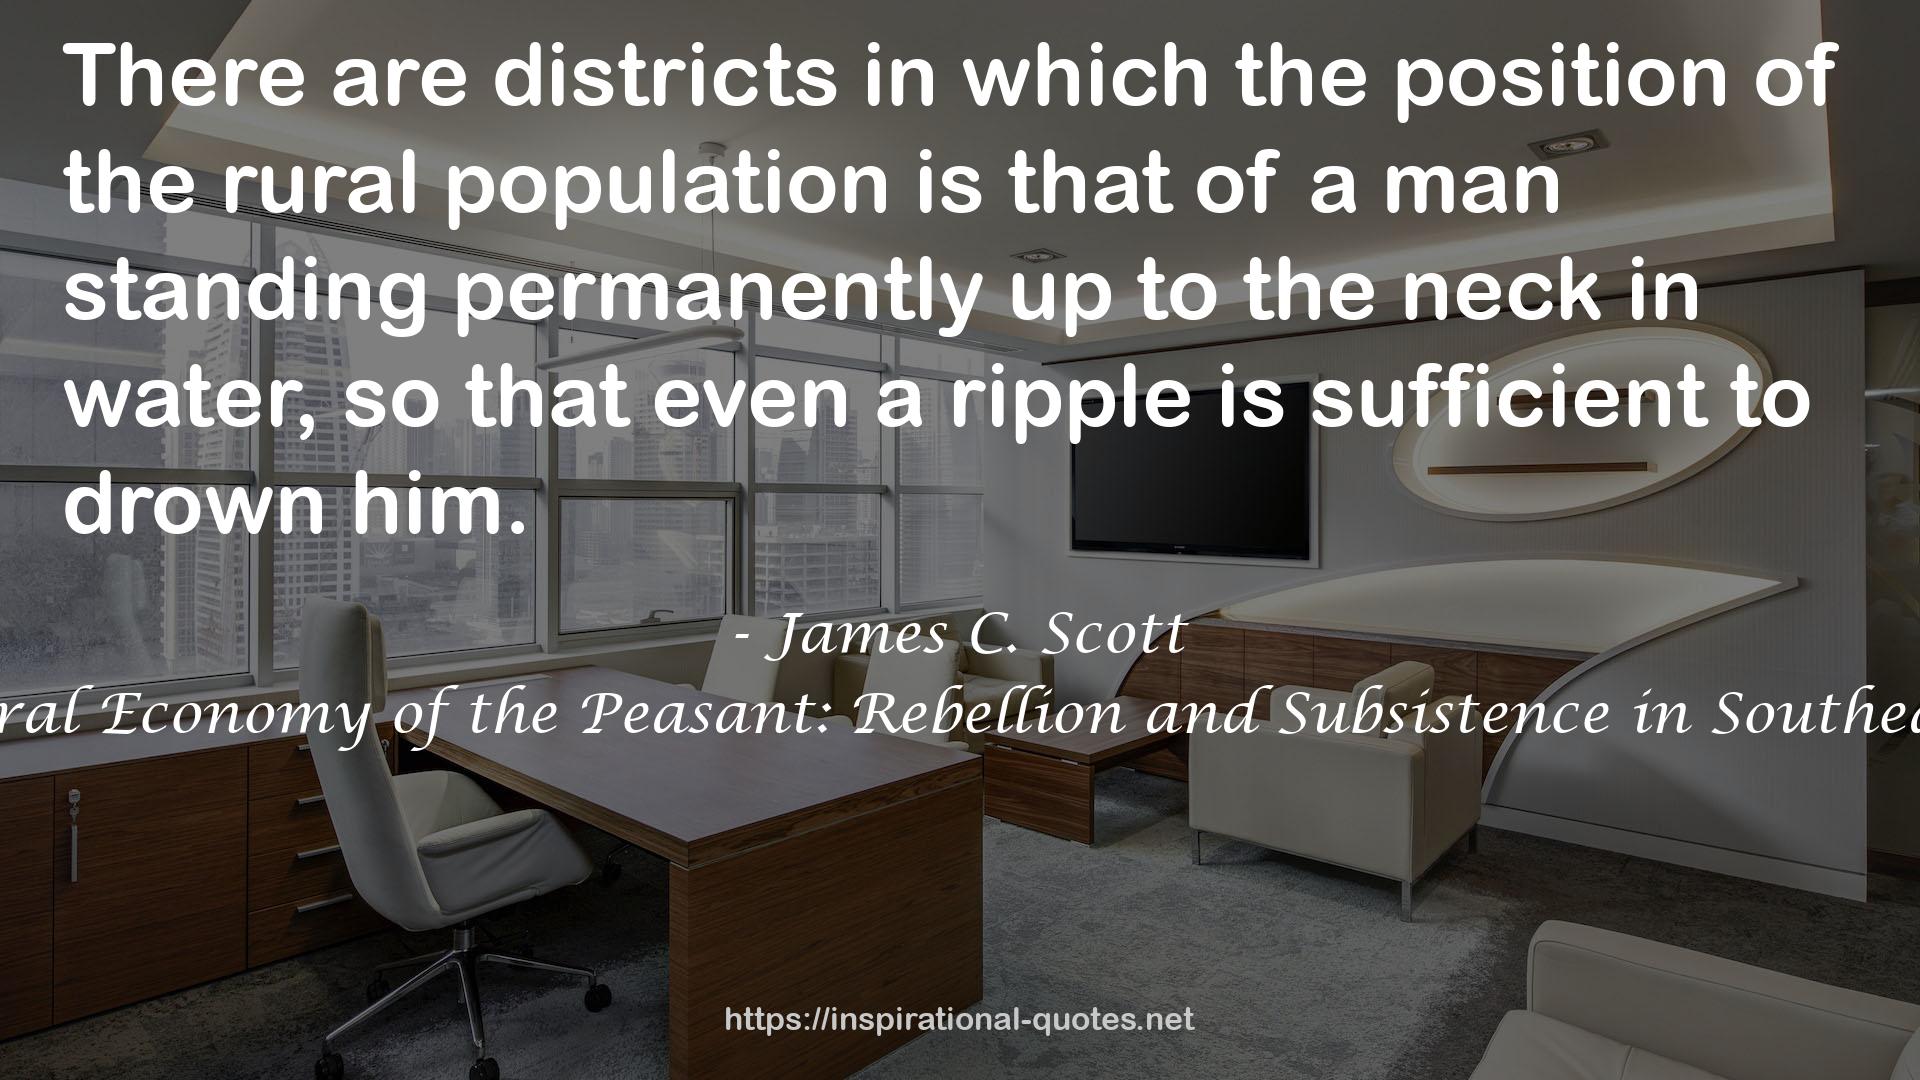 The Moral Economy of the Peasant: Rebellion and Subsistence in Southeast Asia QUOTES